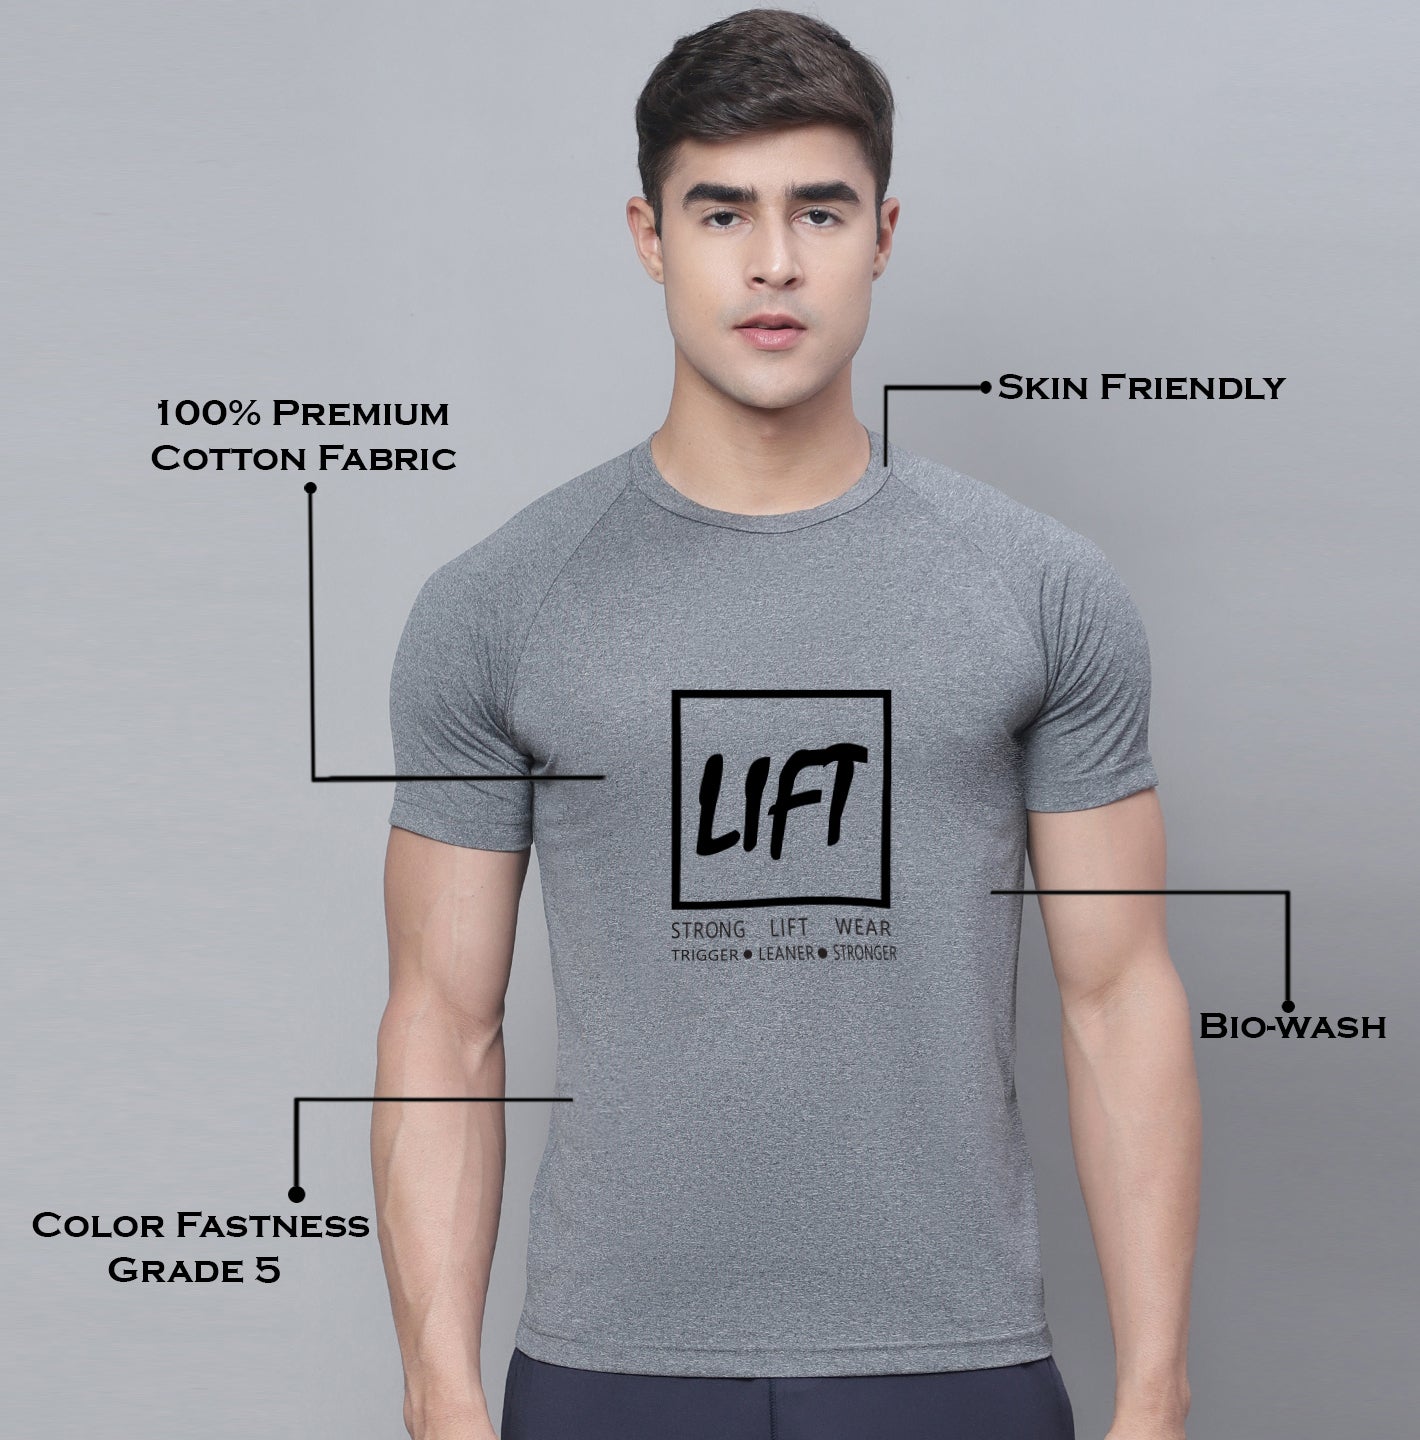 Sports Ultralyte Running Polyester T-Shirt - Friskers